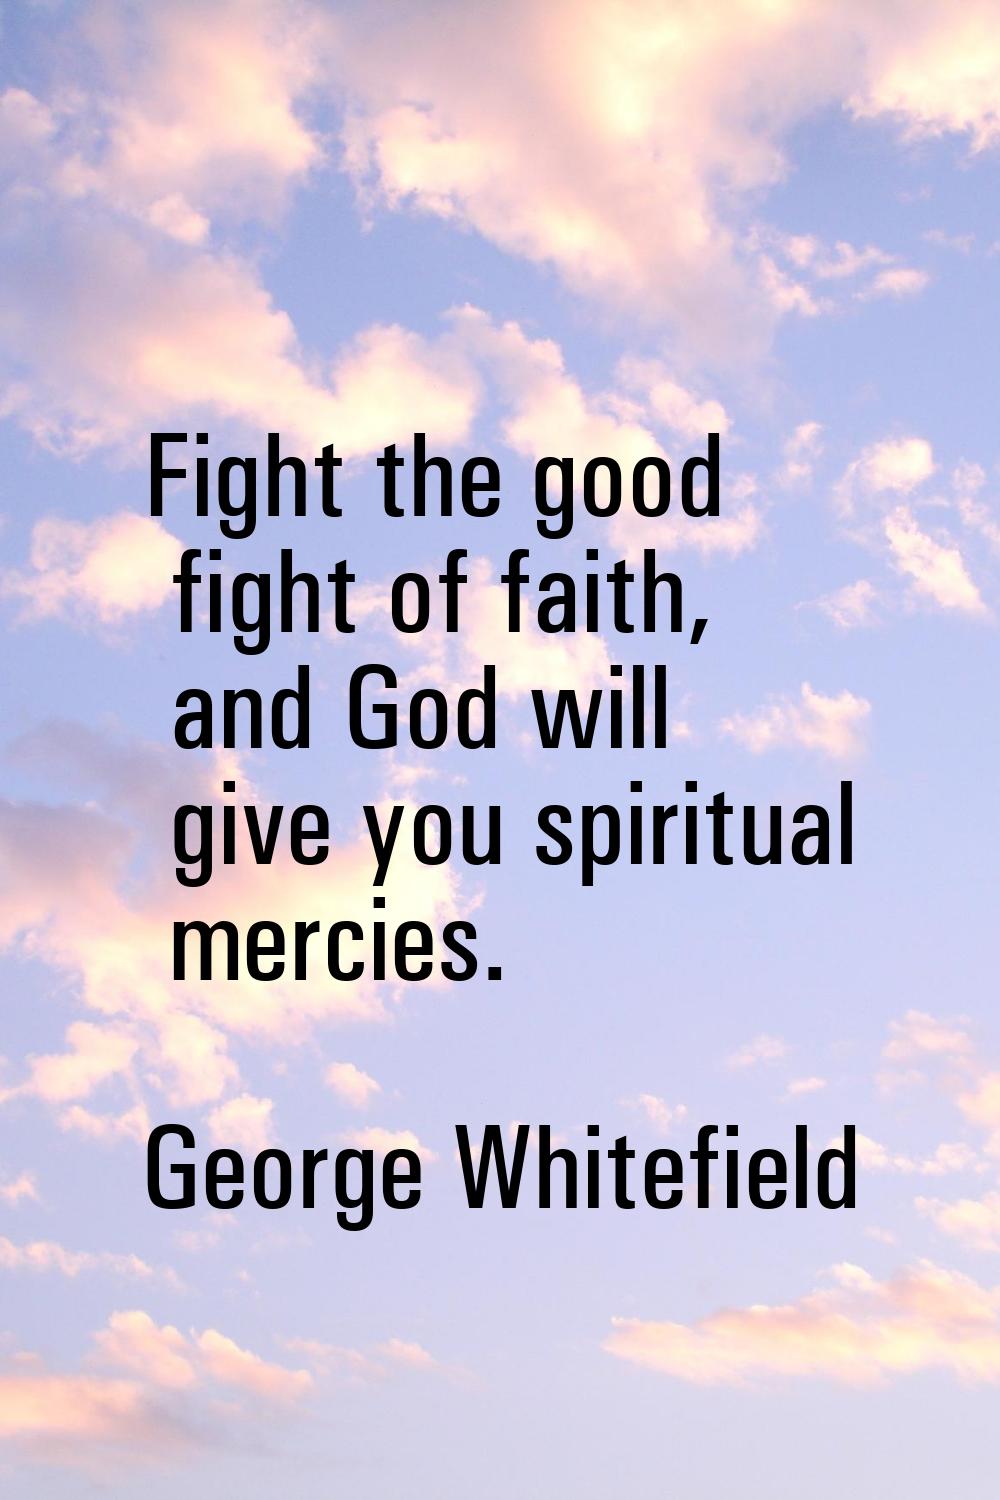 Fight the good fight of faith, and God will give you spiritual mercies.